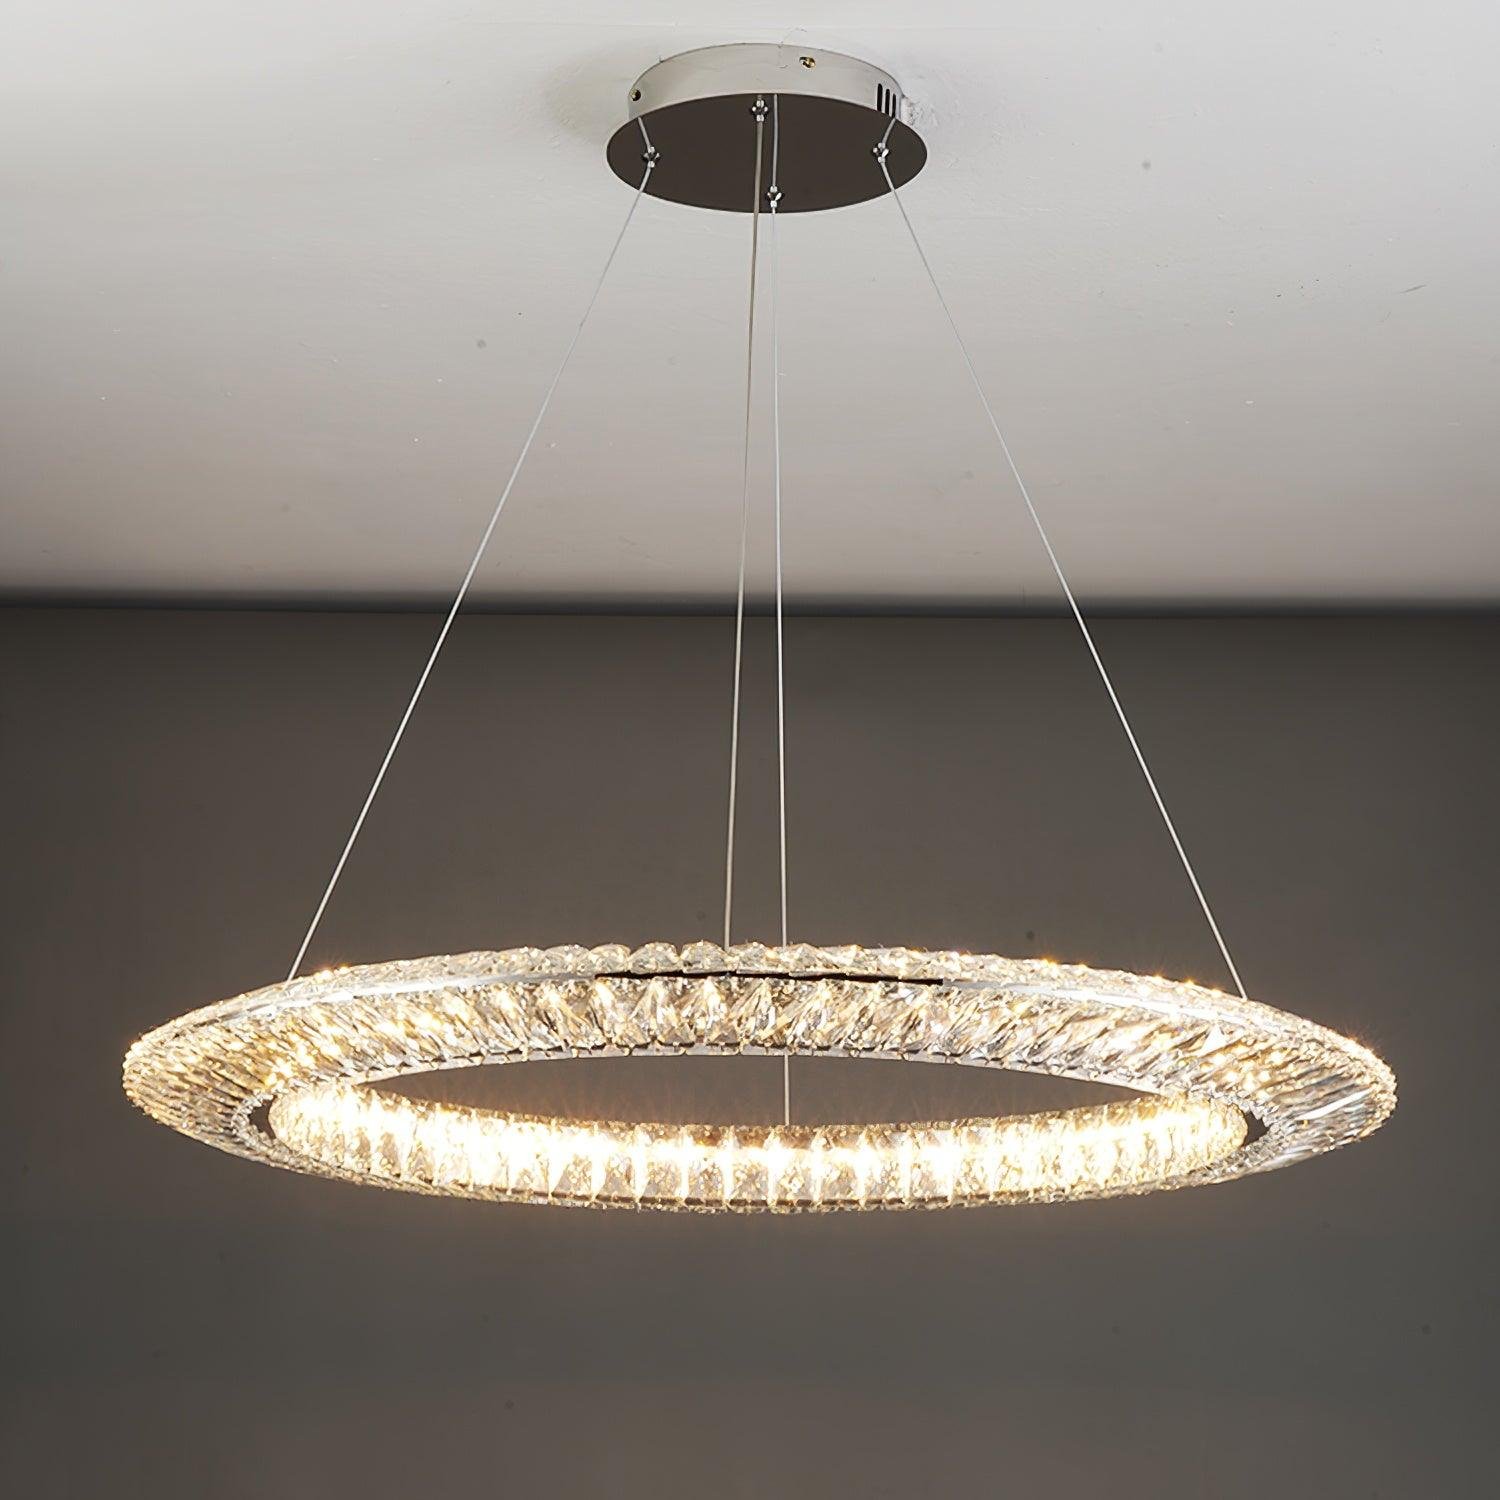 Silver Tanager Geometric Chandelier, with a diameter of 31.5 inches and a height of 59 inches (or 80cm in diameter and 150cm in height), emitting cool white light.